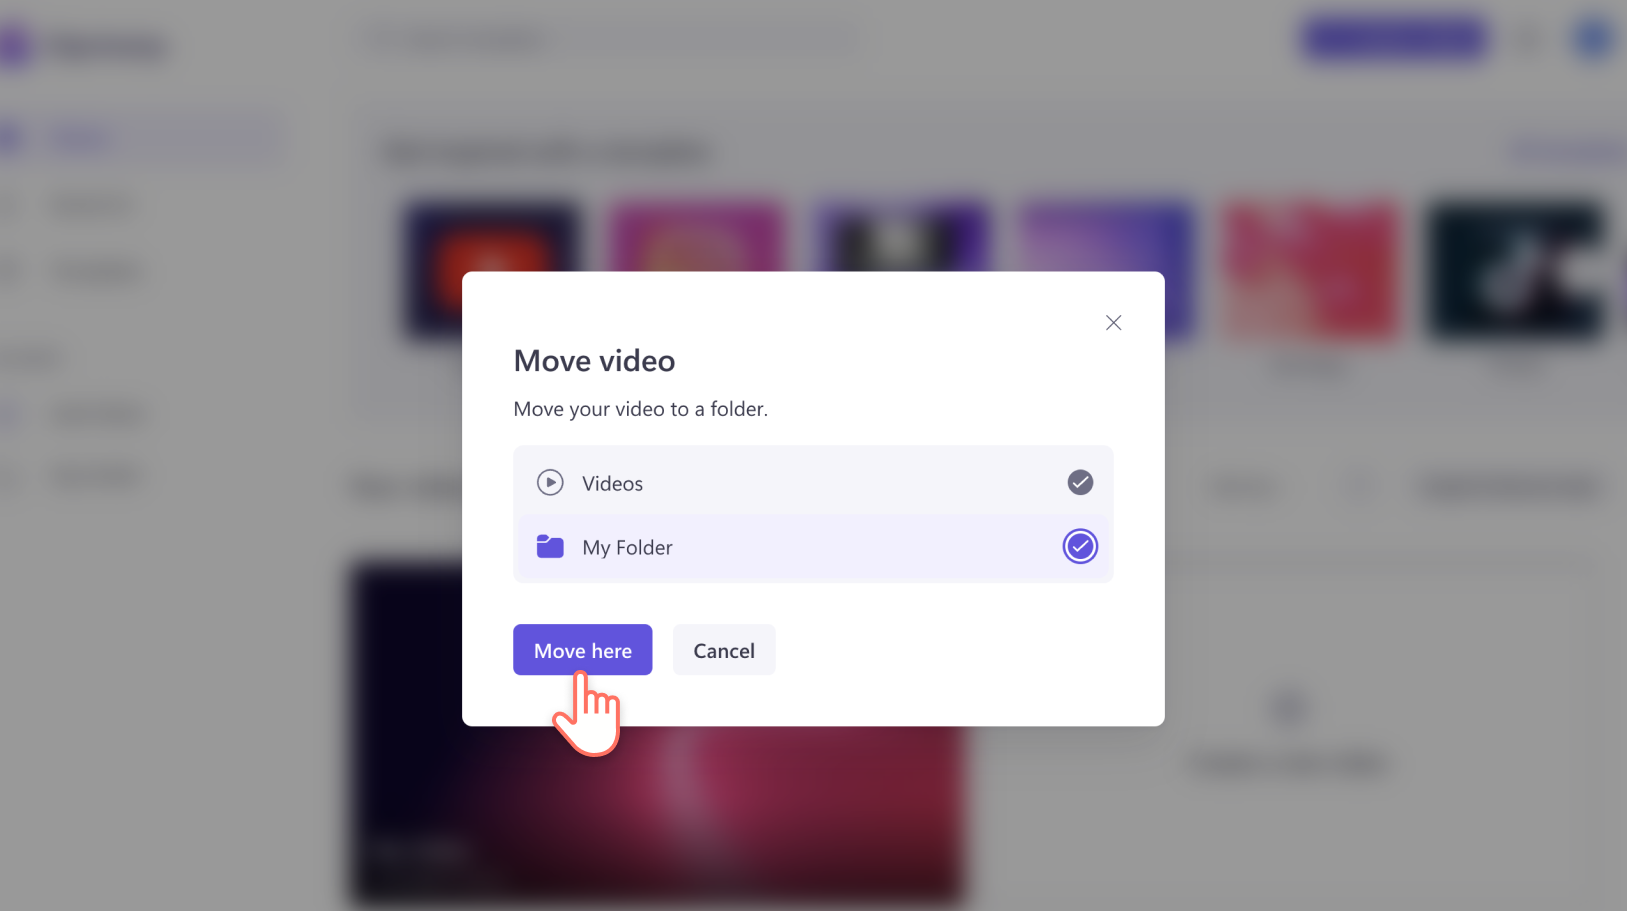 A screenshot of the "Move video" pop up in Clipchamp, the "My folder" folder is selected.